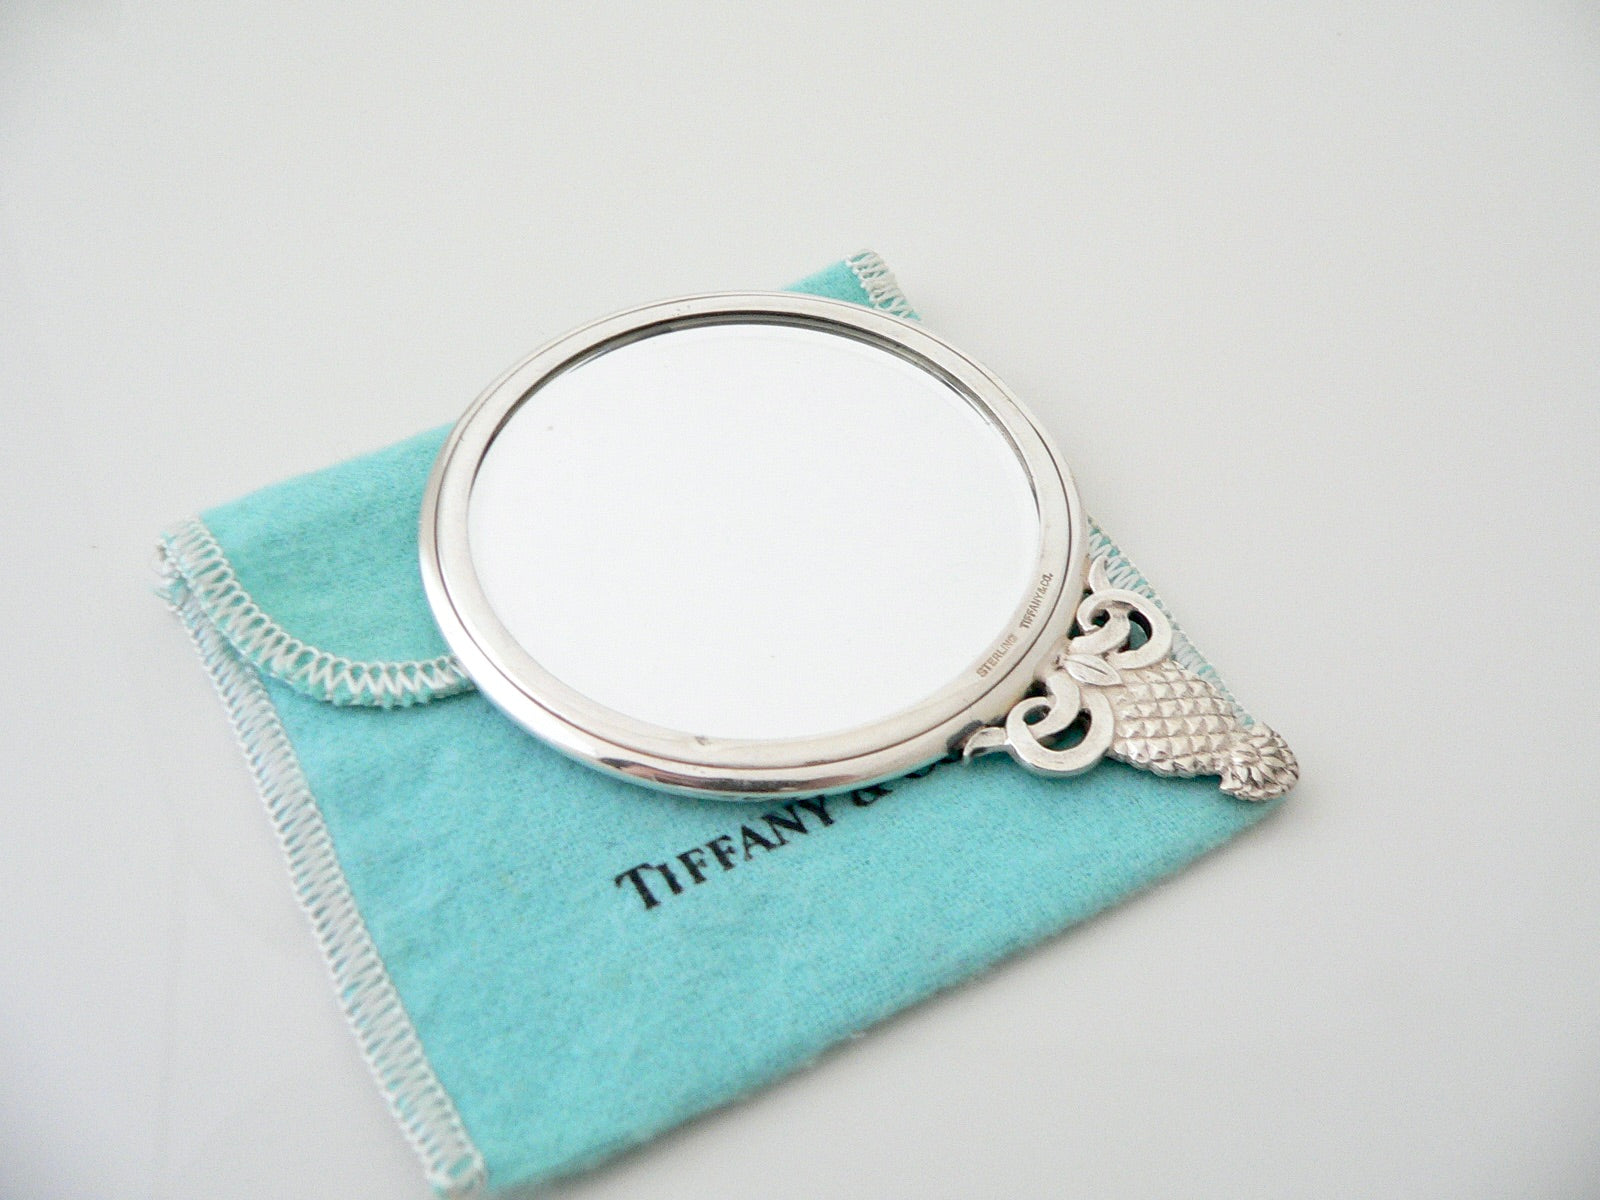 Vintage Ladies Pocket purse Mirror Silver Plate With cute bow on top 2.75